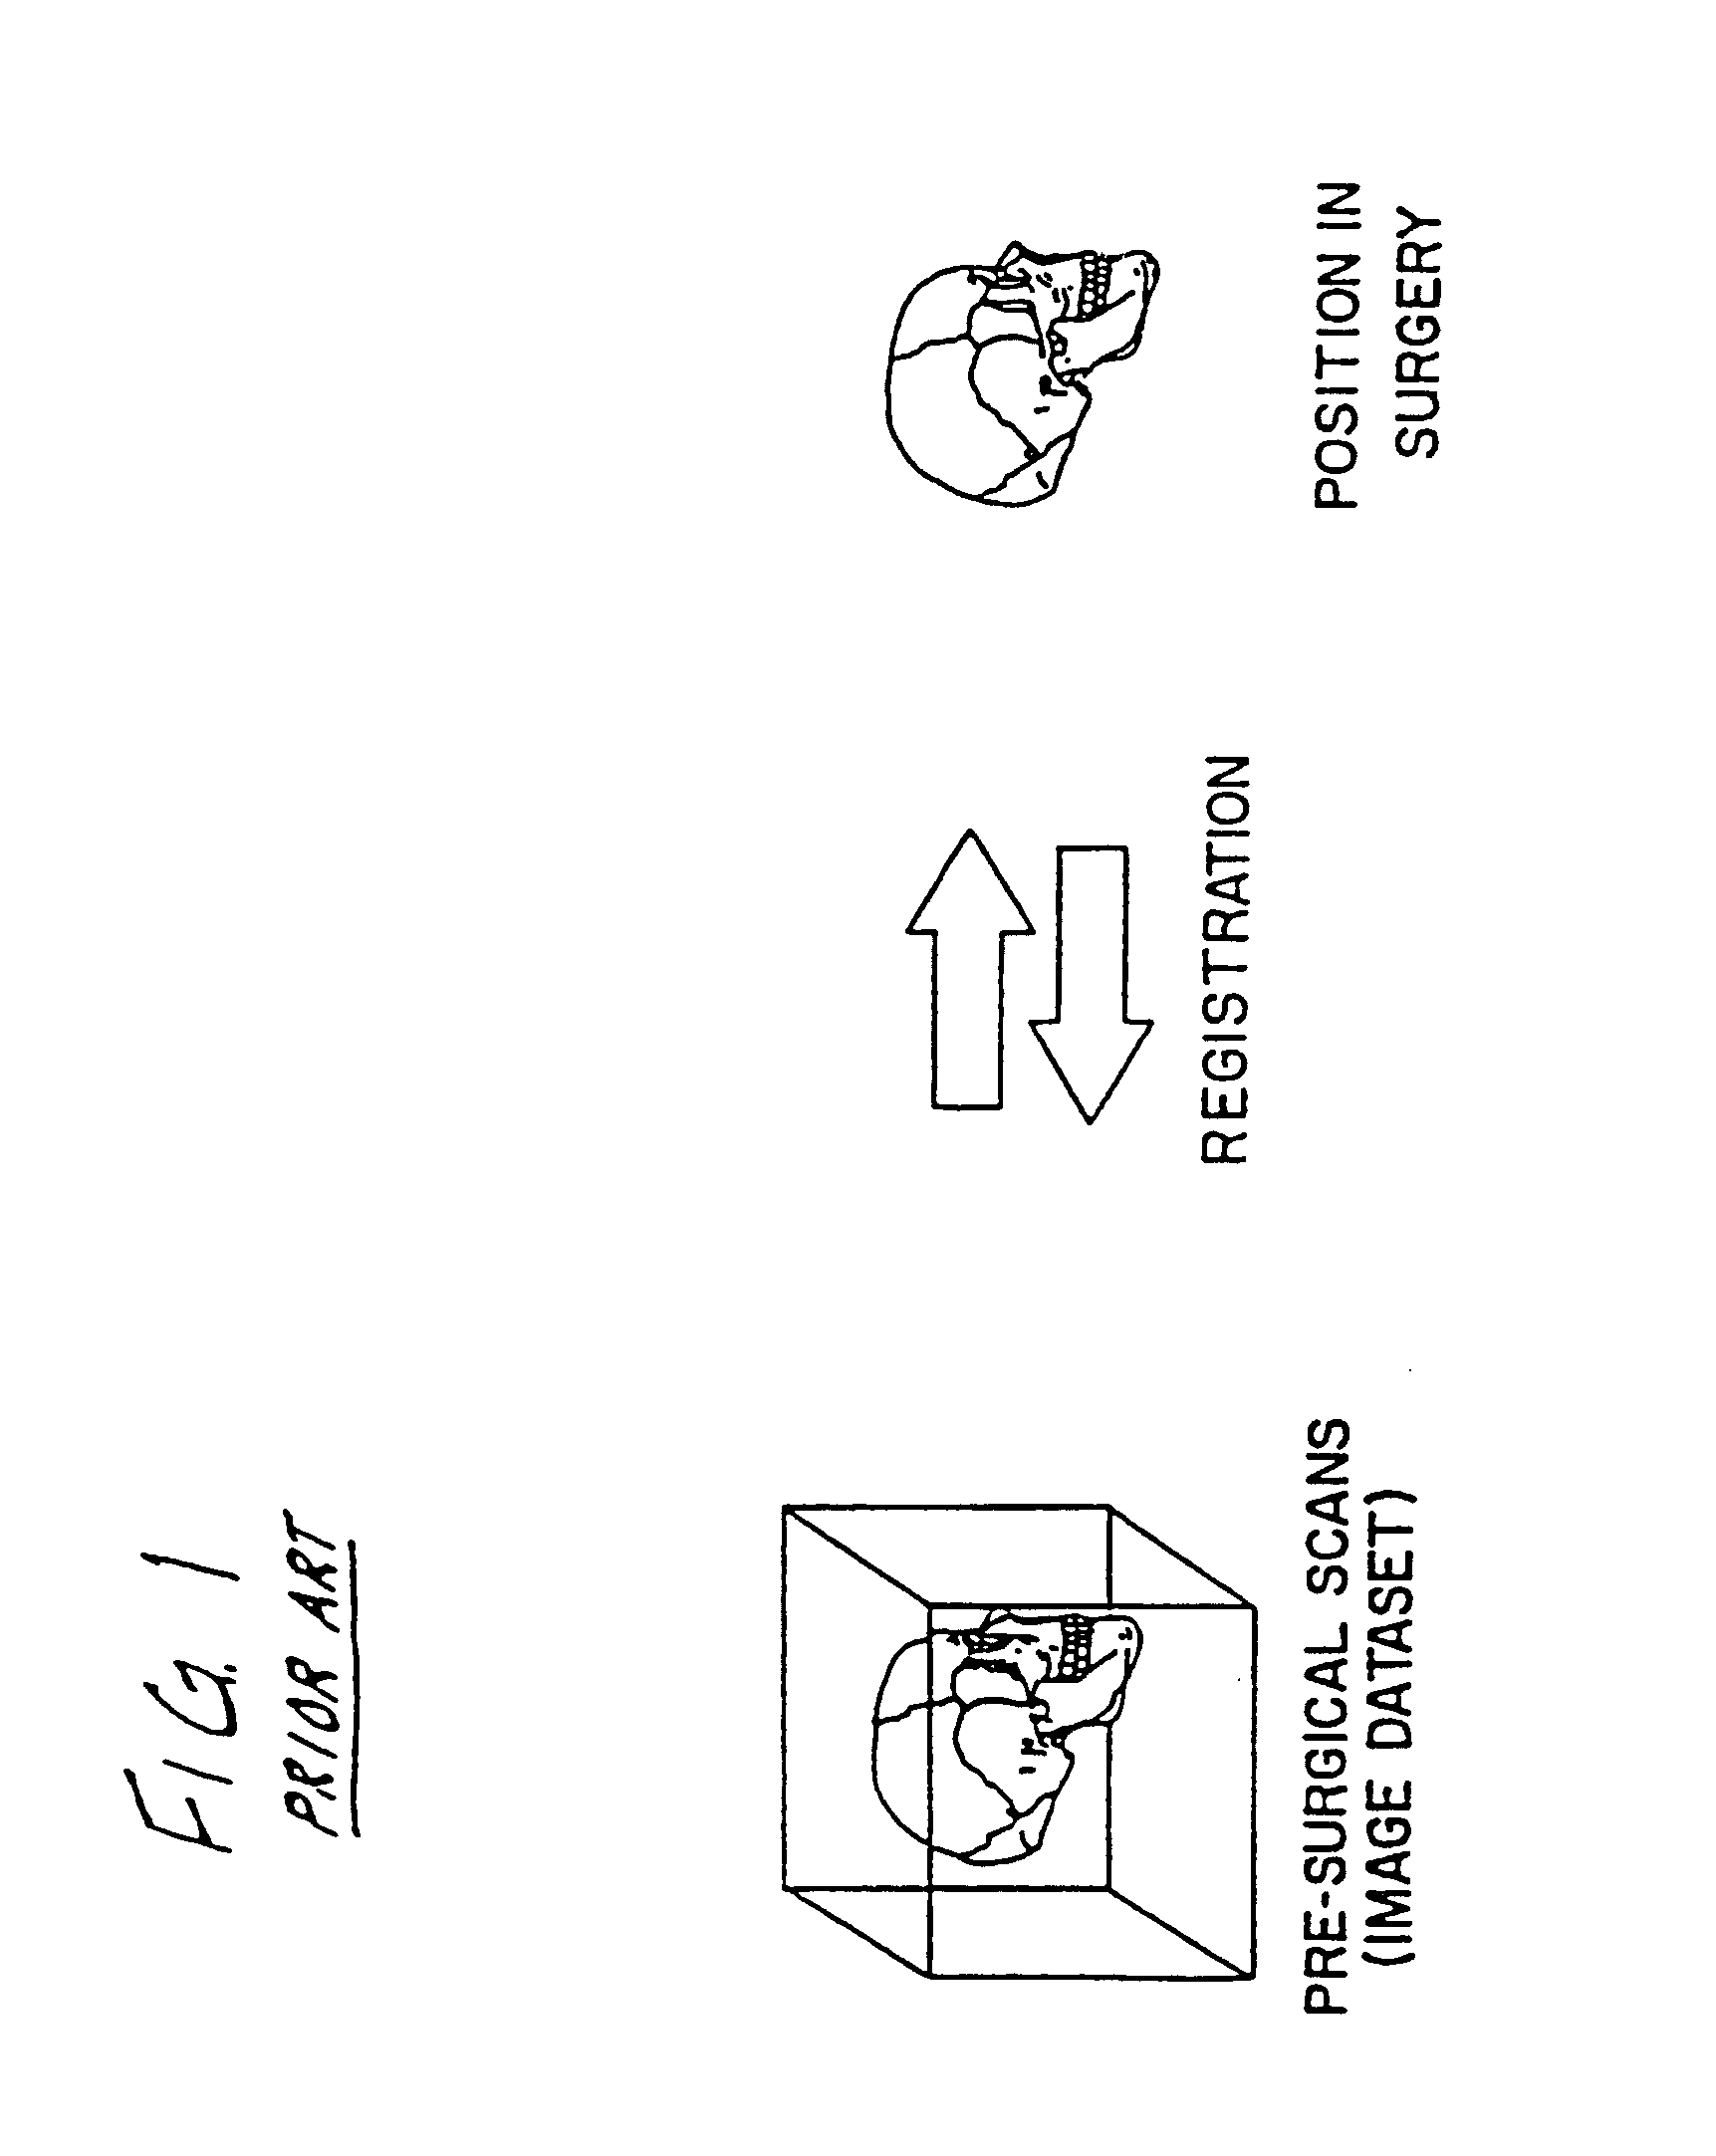 Surgical navigation systems including reference and localization frames